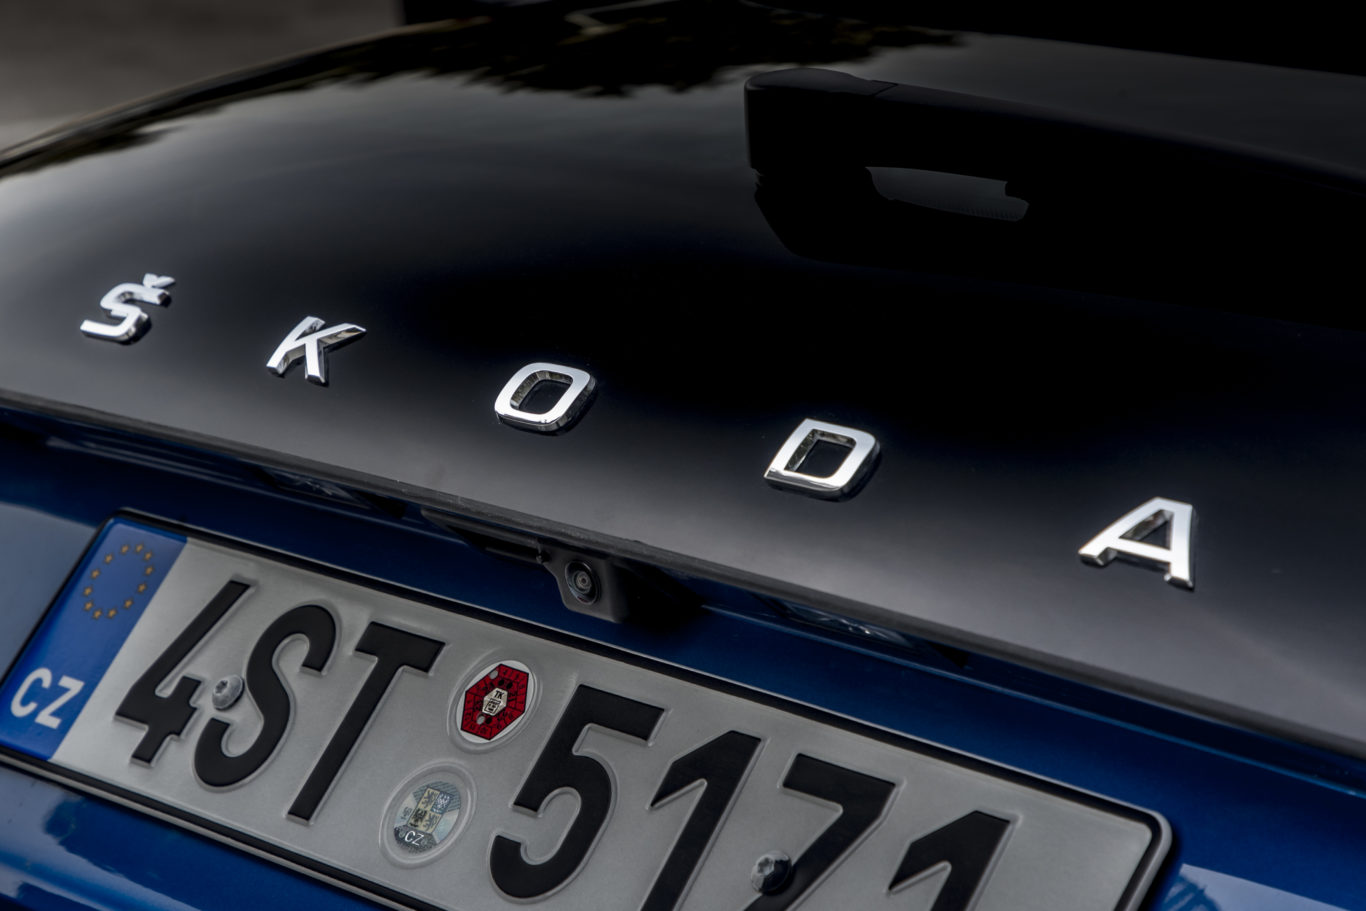 The Scala is the first Skoda to receive a brand badge on the boot